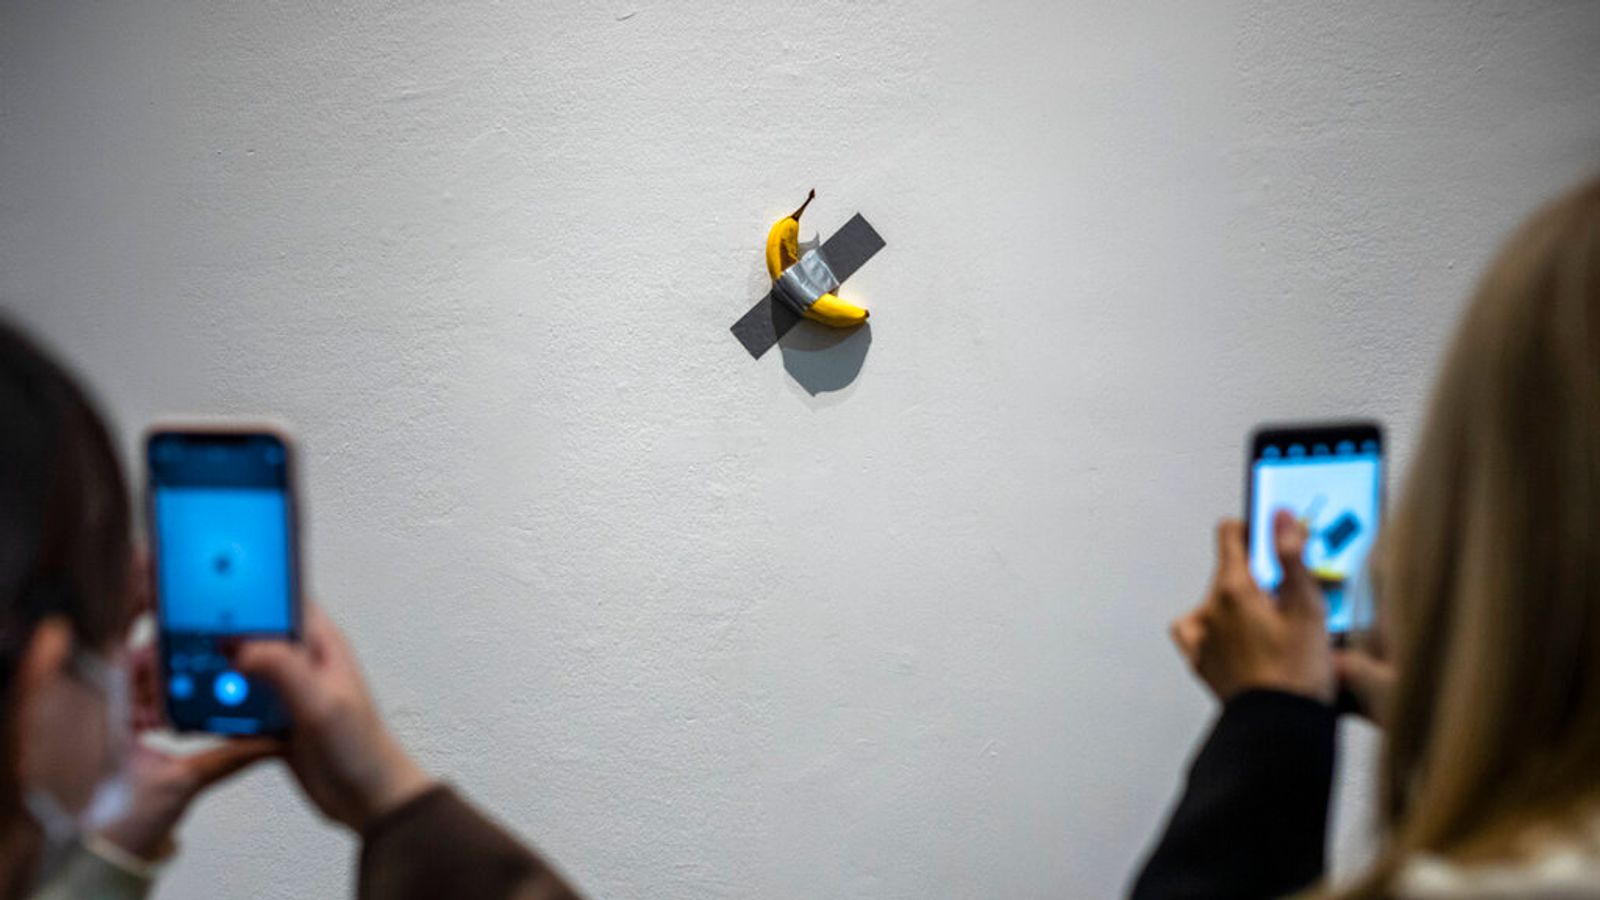 'Hungry' South Korean student takes banana from Maurizio Cattelan's art installation from wall and eats it | World News